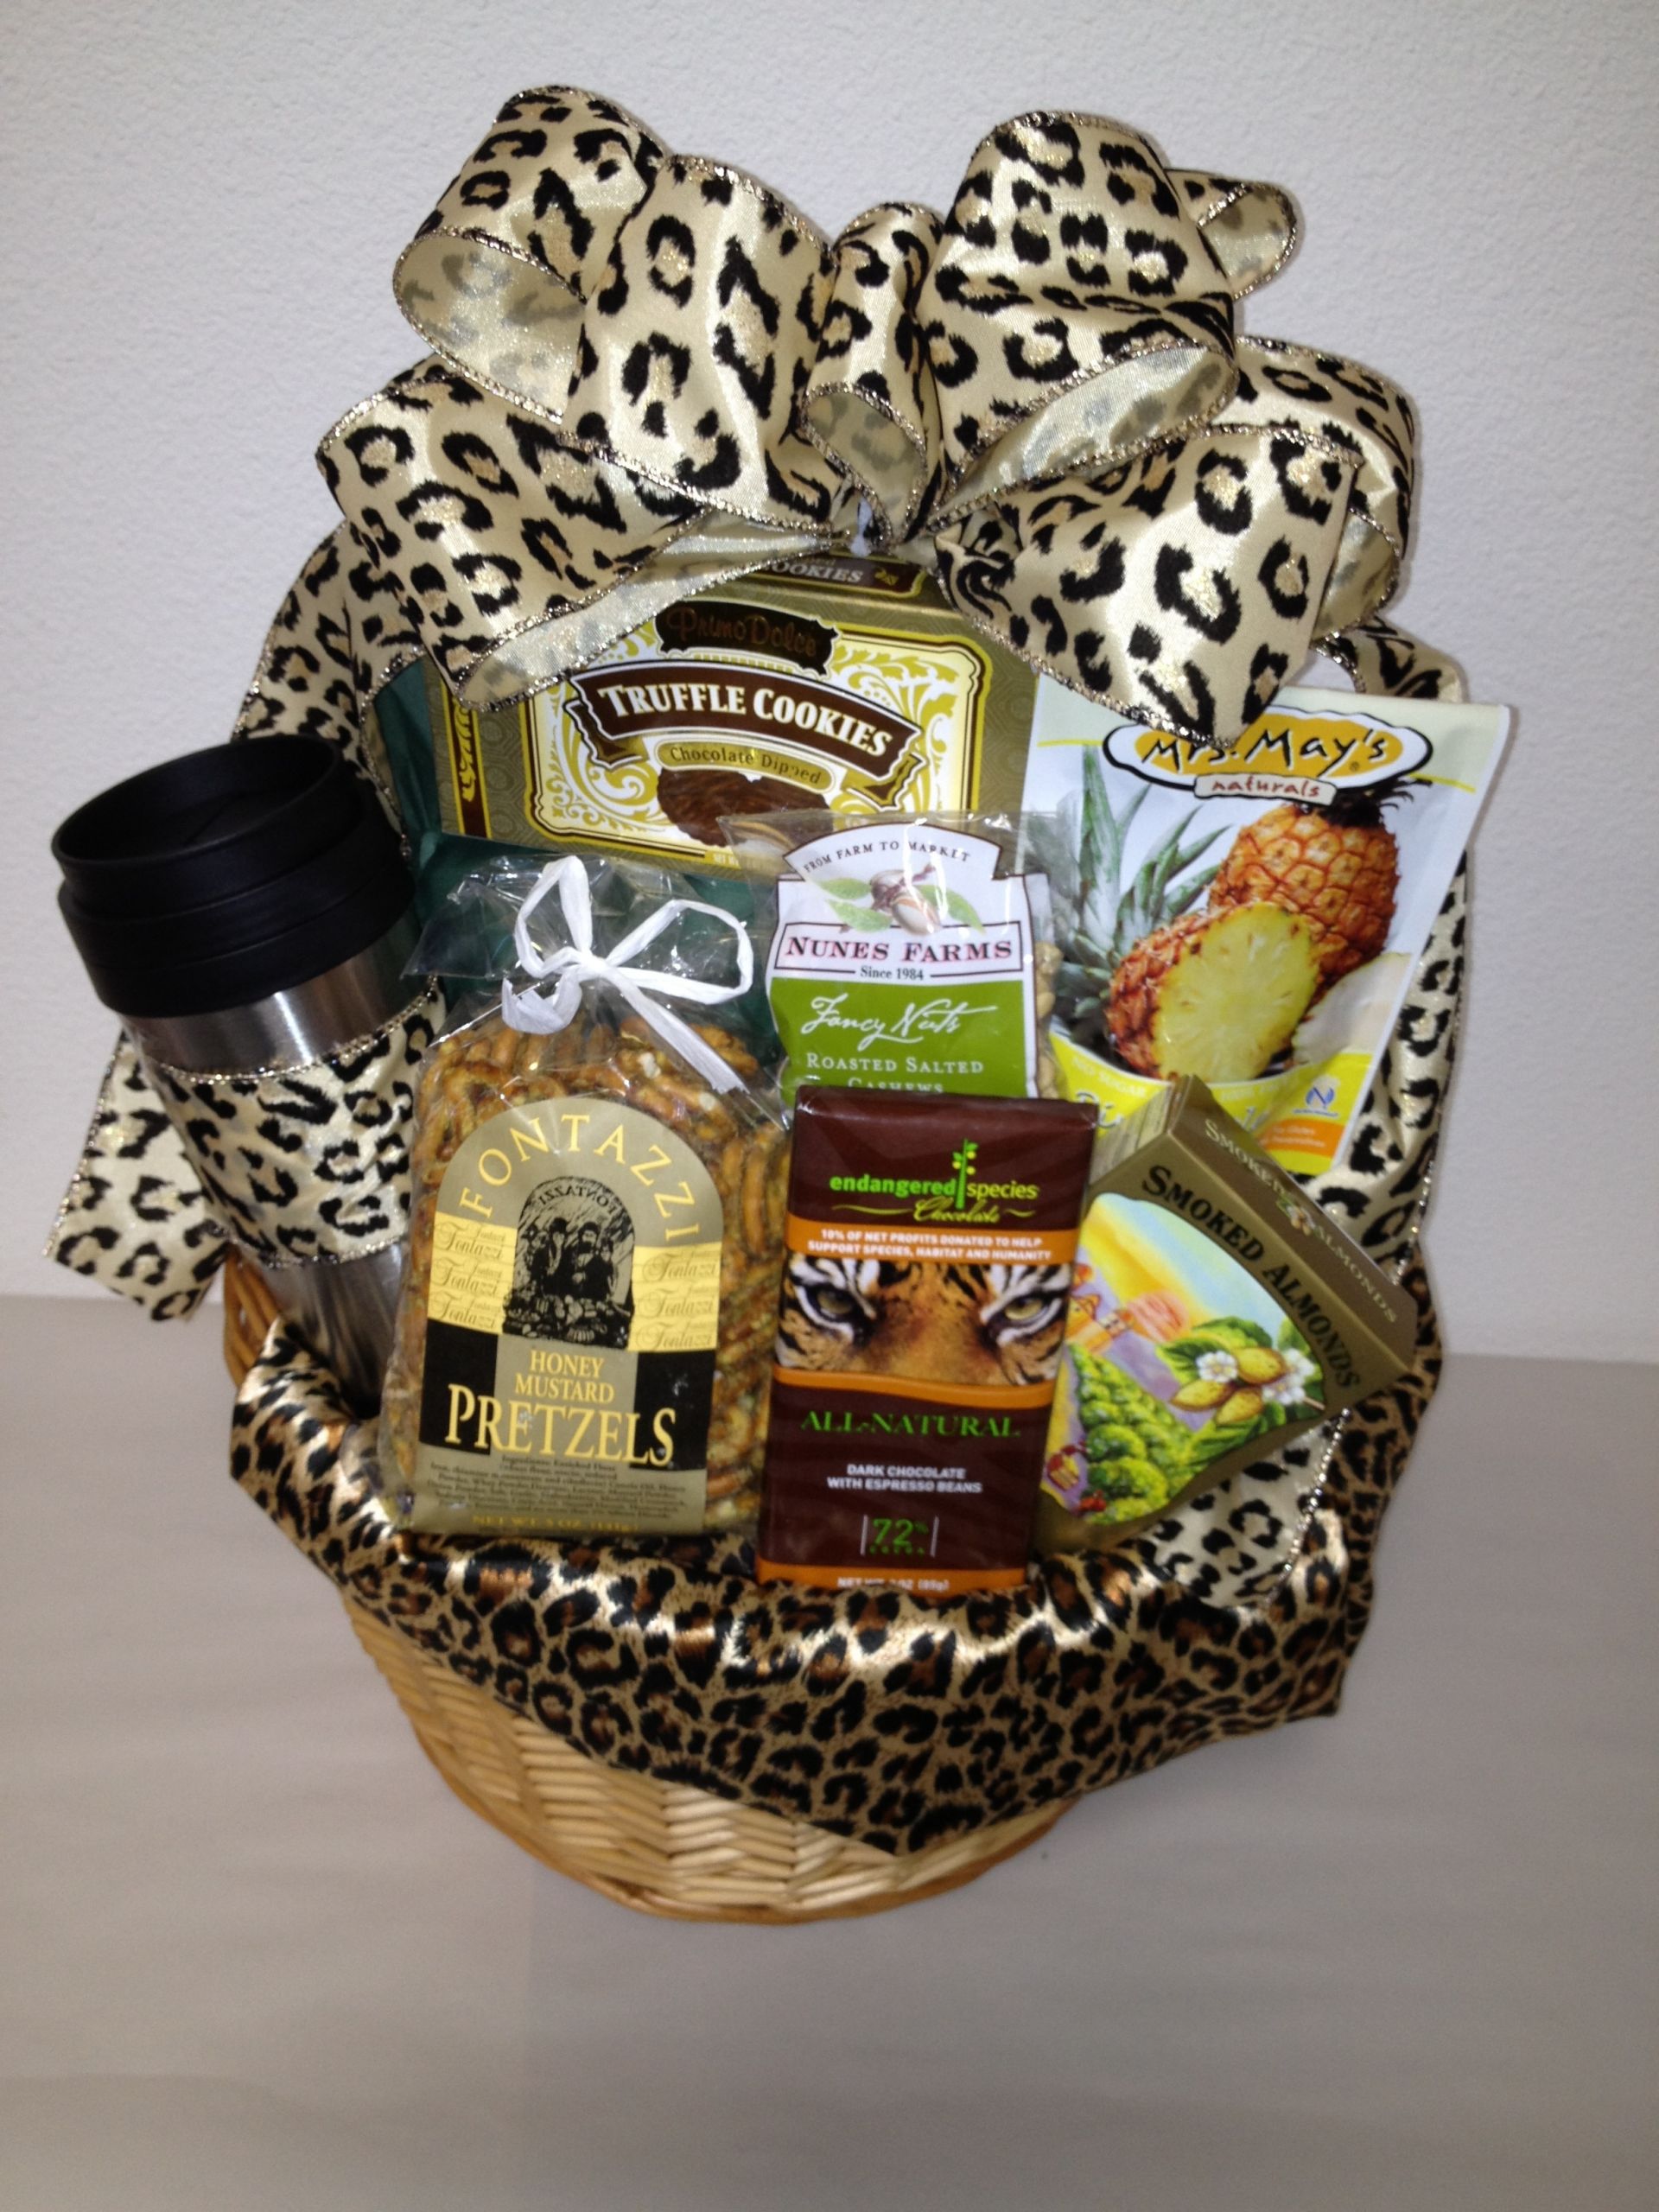 New Dad Gift Basket Ideas
 Fun New Father s Day Gift Baskets